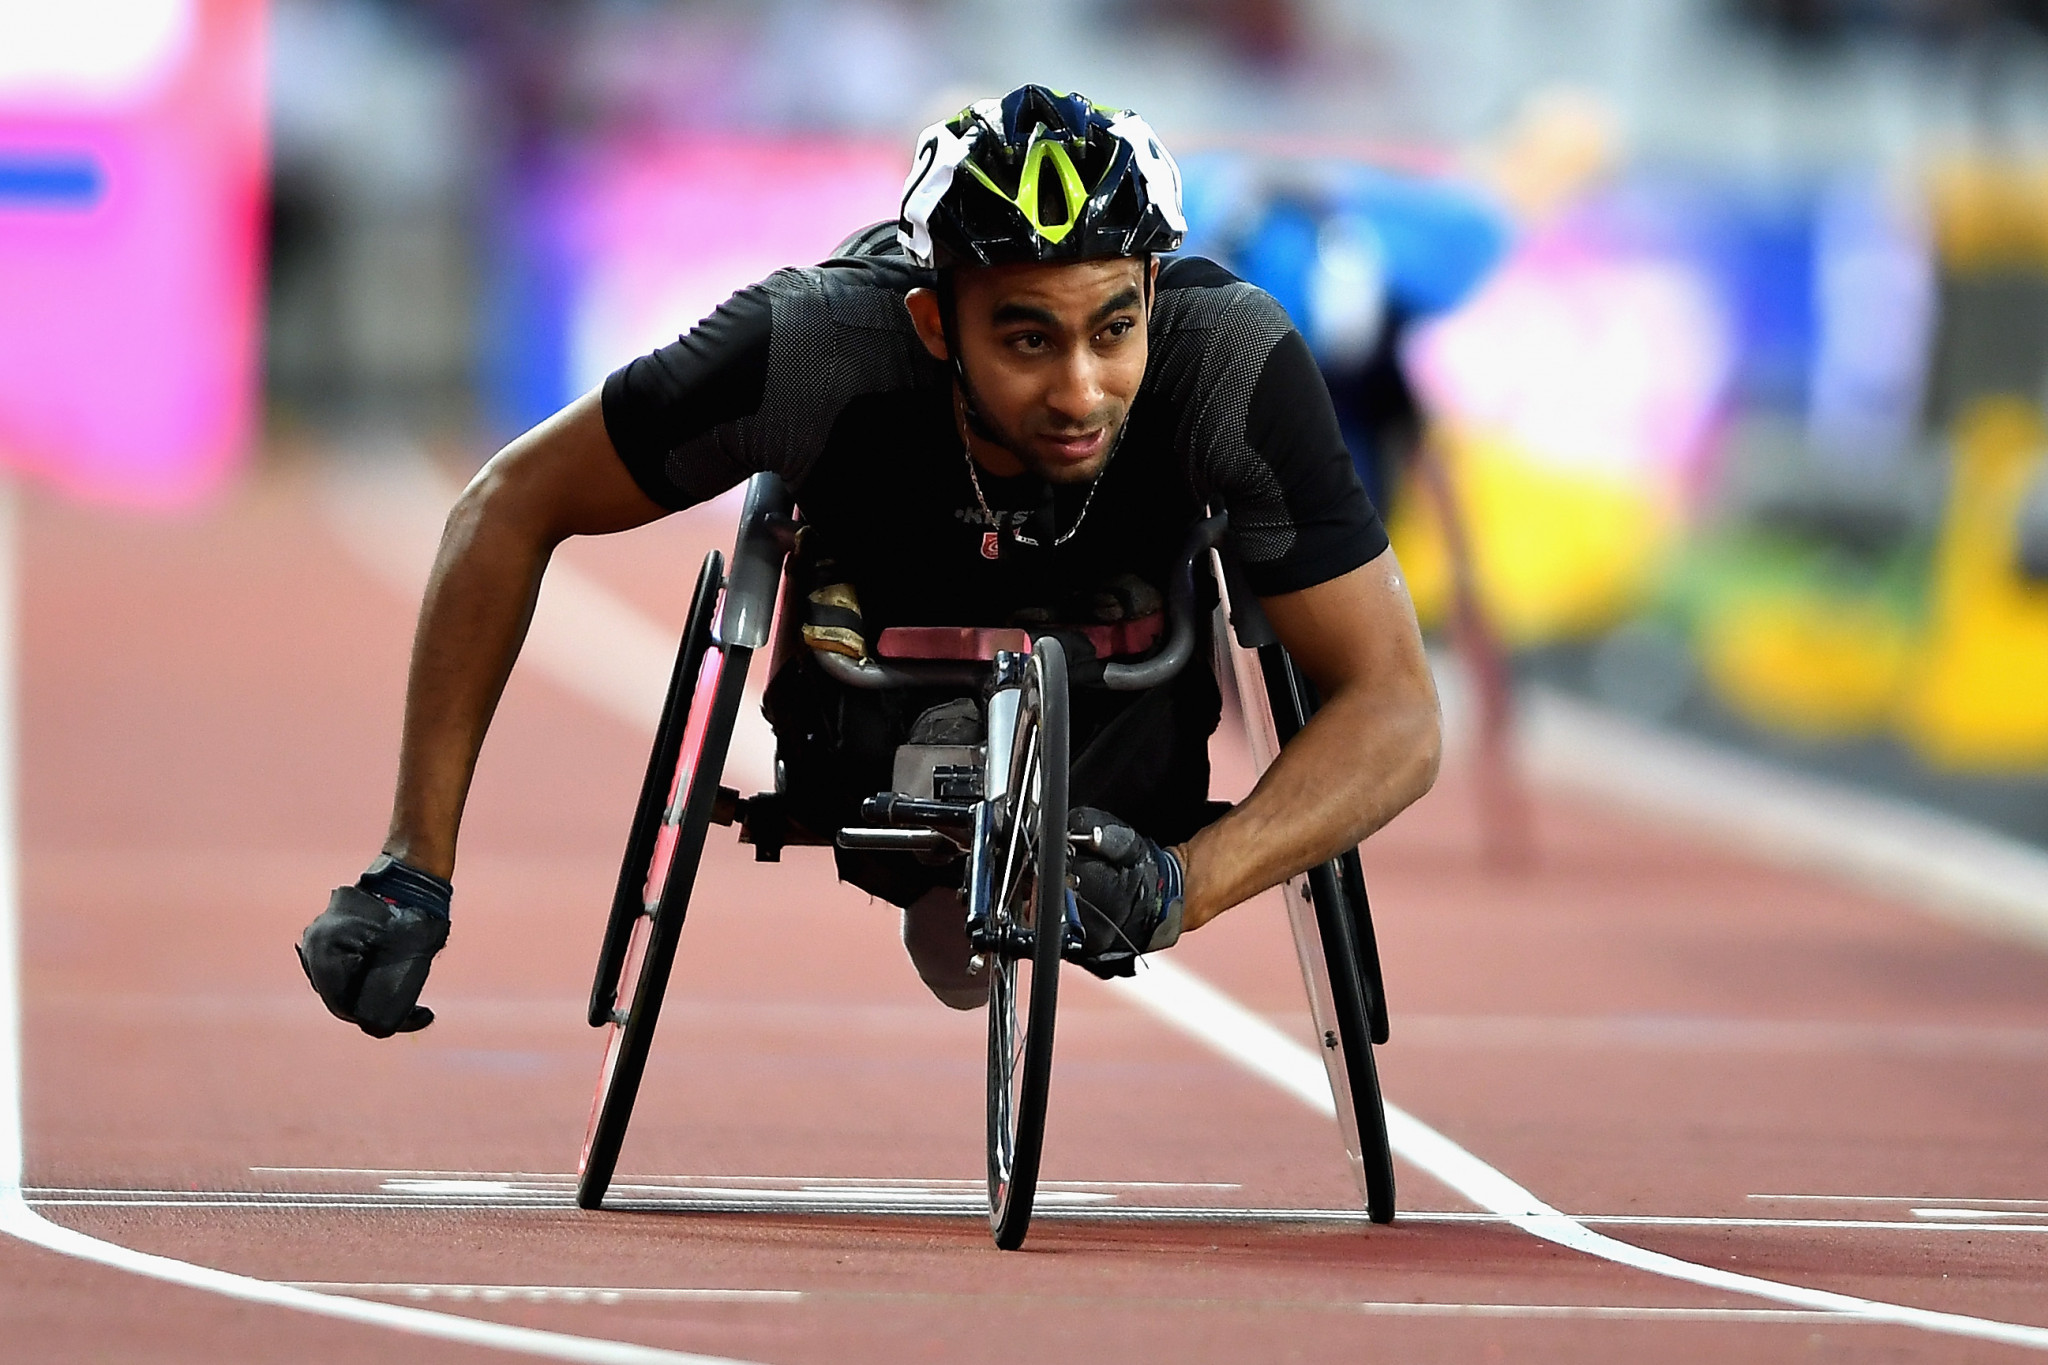 Tunisia's Walid Ktila triumphed in the 100 metres at the Tunis World Para Athletics Grand Prix ©Getty Images